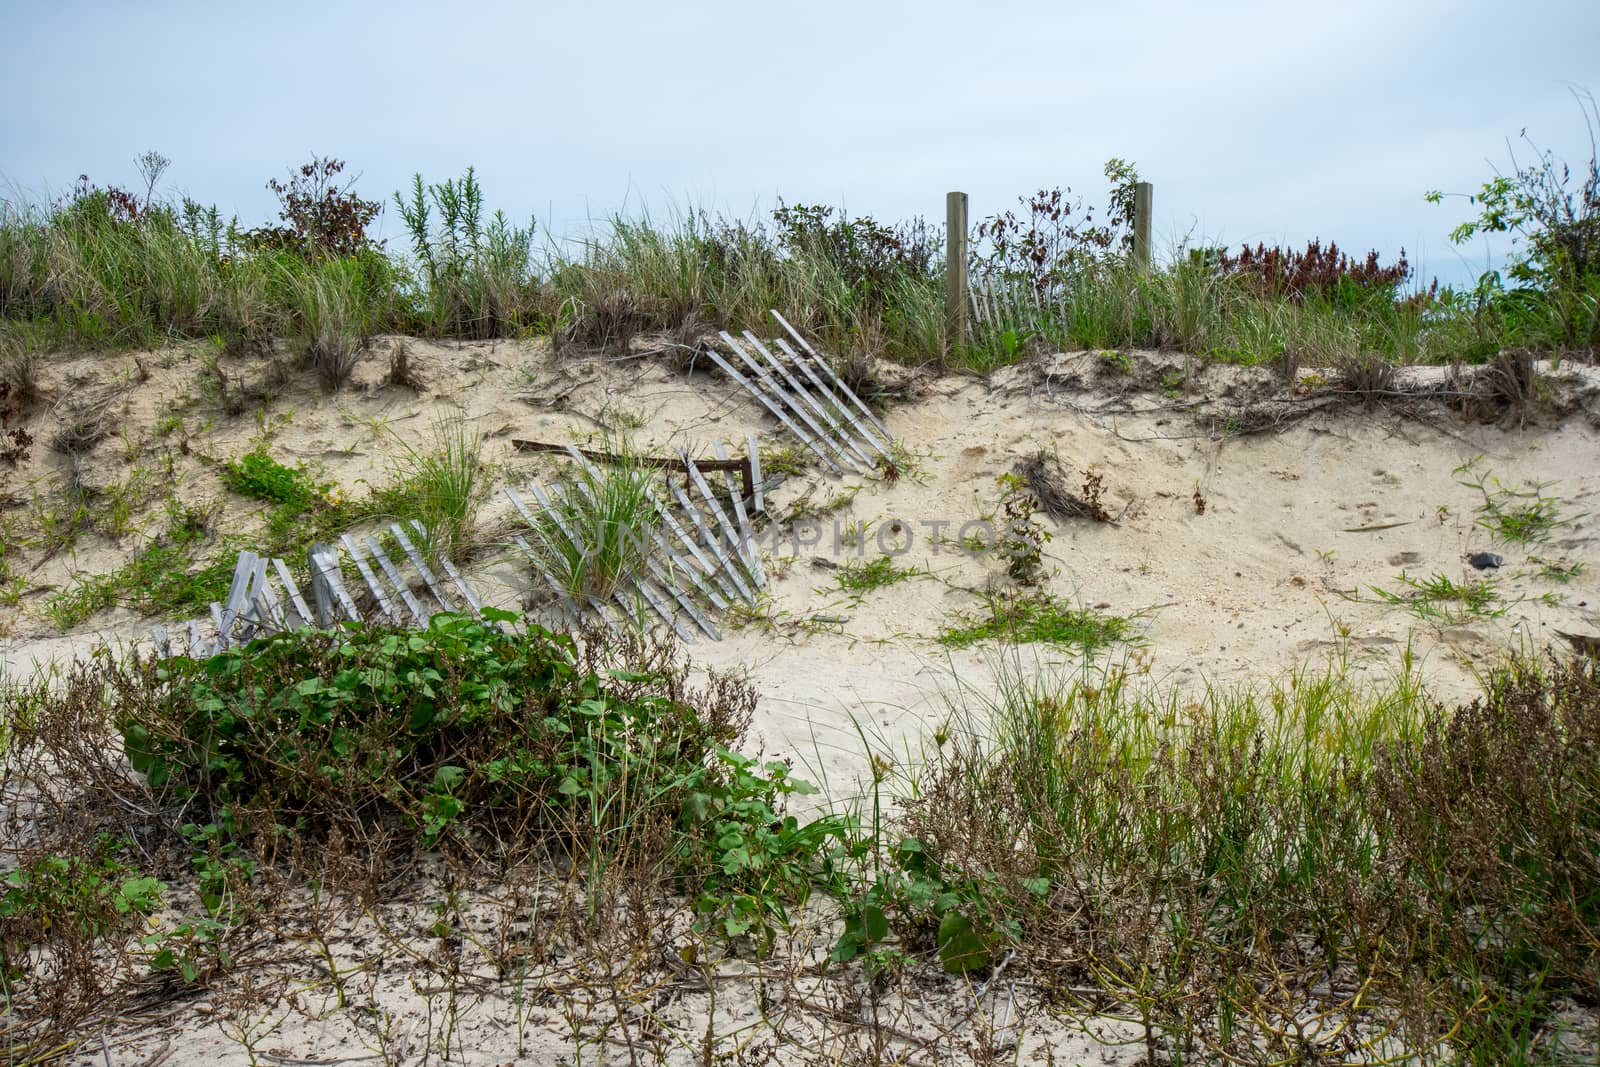 A Sand Dune on the Beach With a Broken Wood Fence and Overgrown Plants